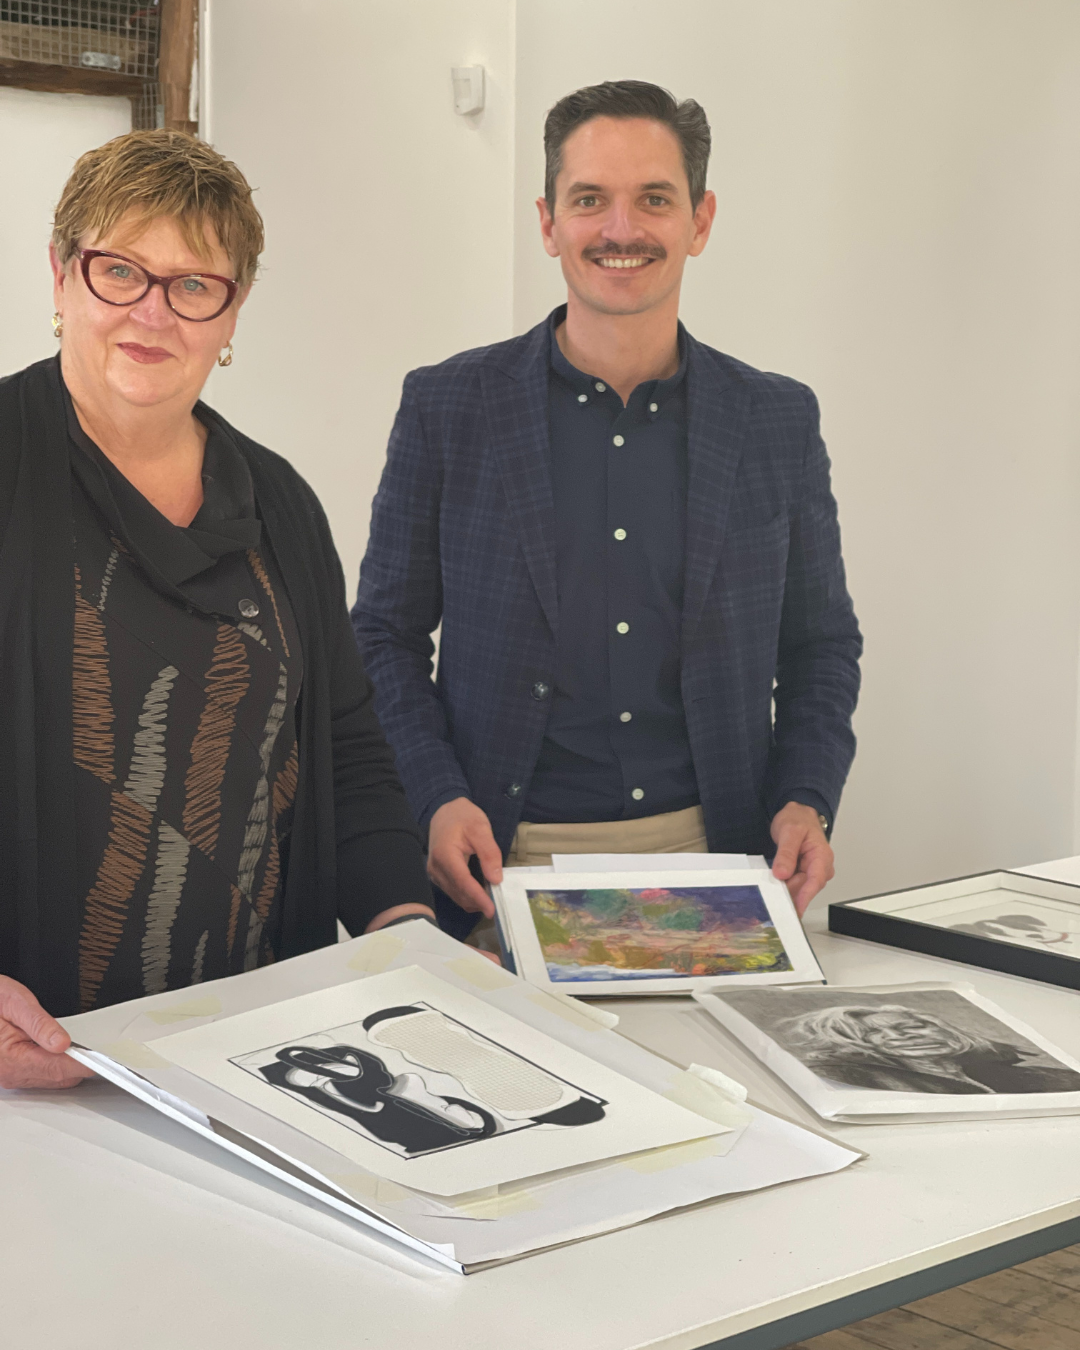 Wendy Teakel, Artist and Marcus Mills-Smith, Ginninderry at the judging of the Ginninderry Drawing Prize.